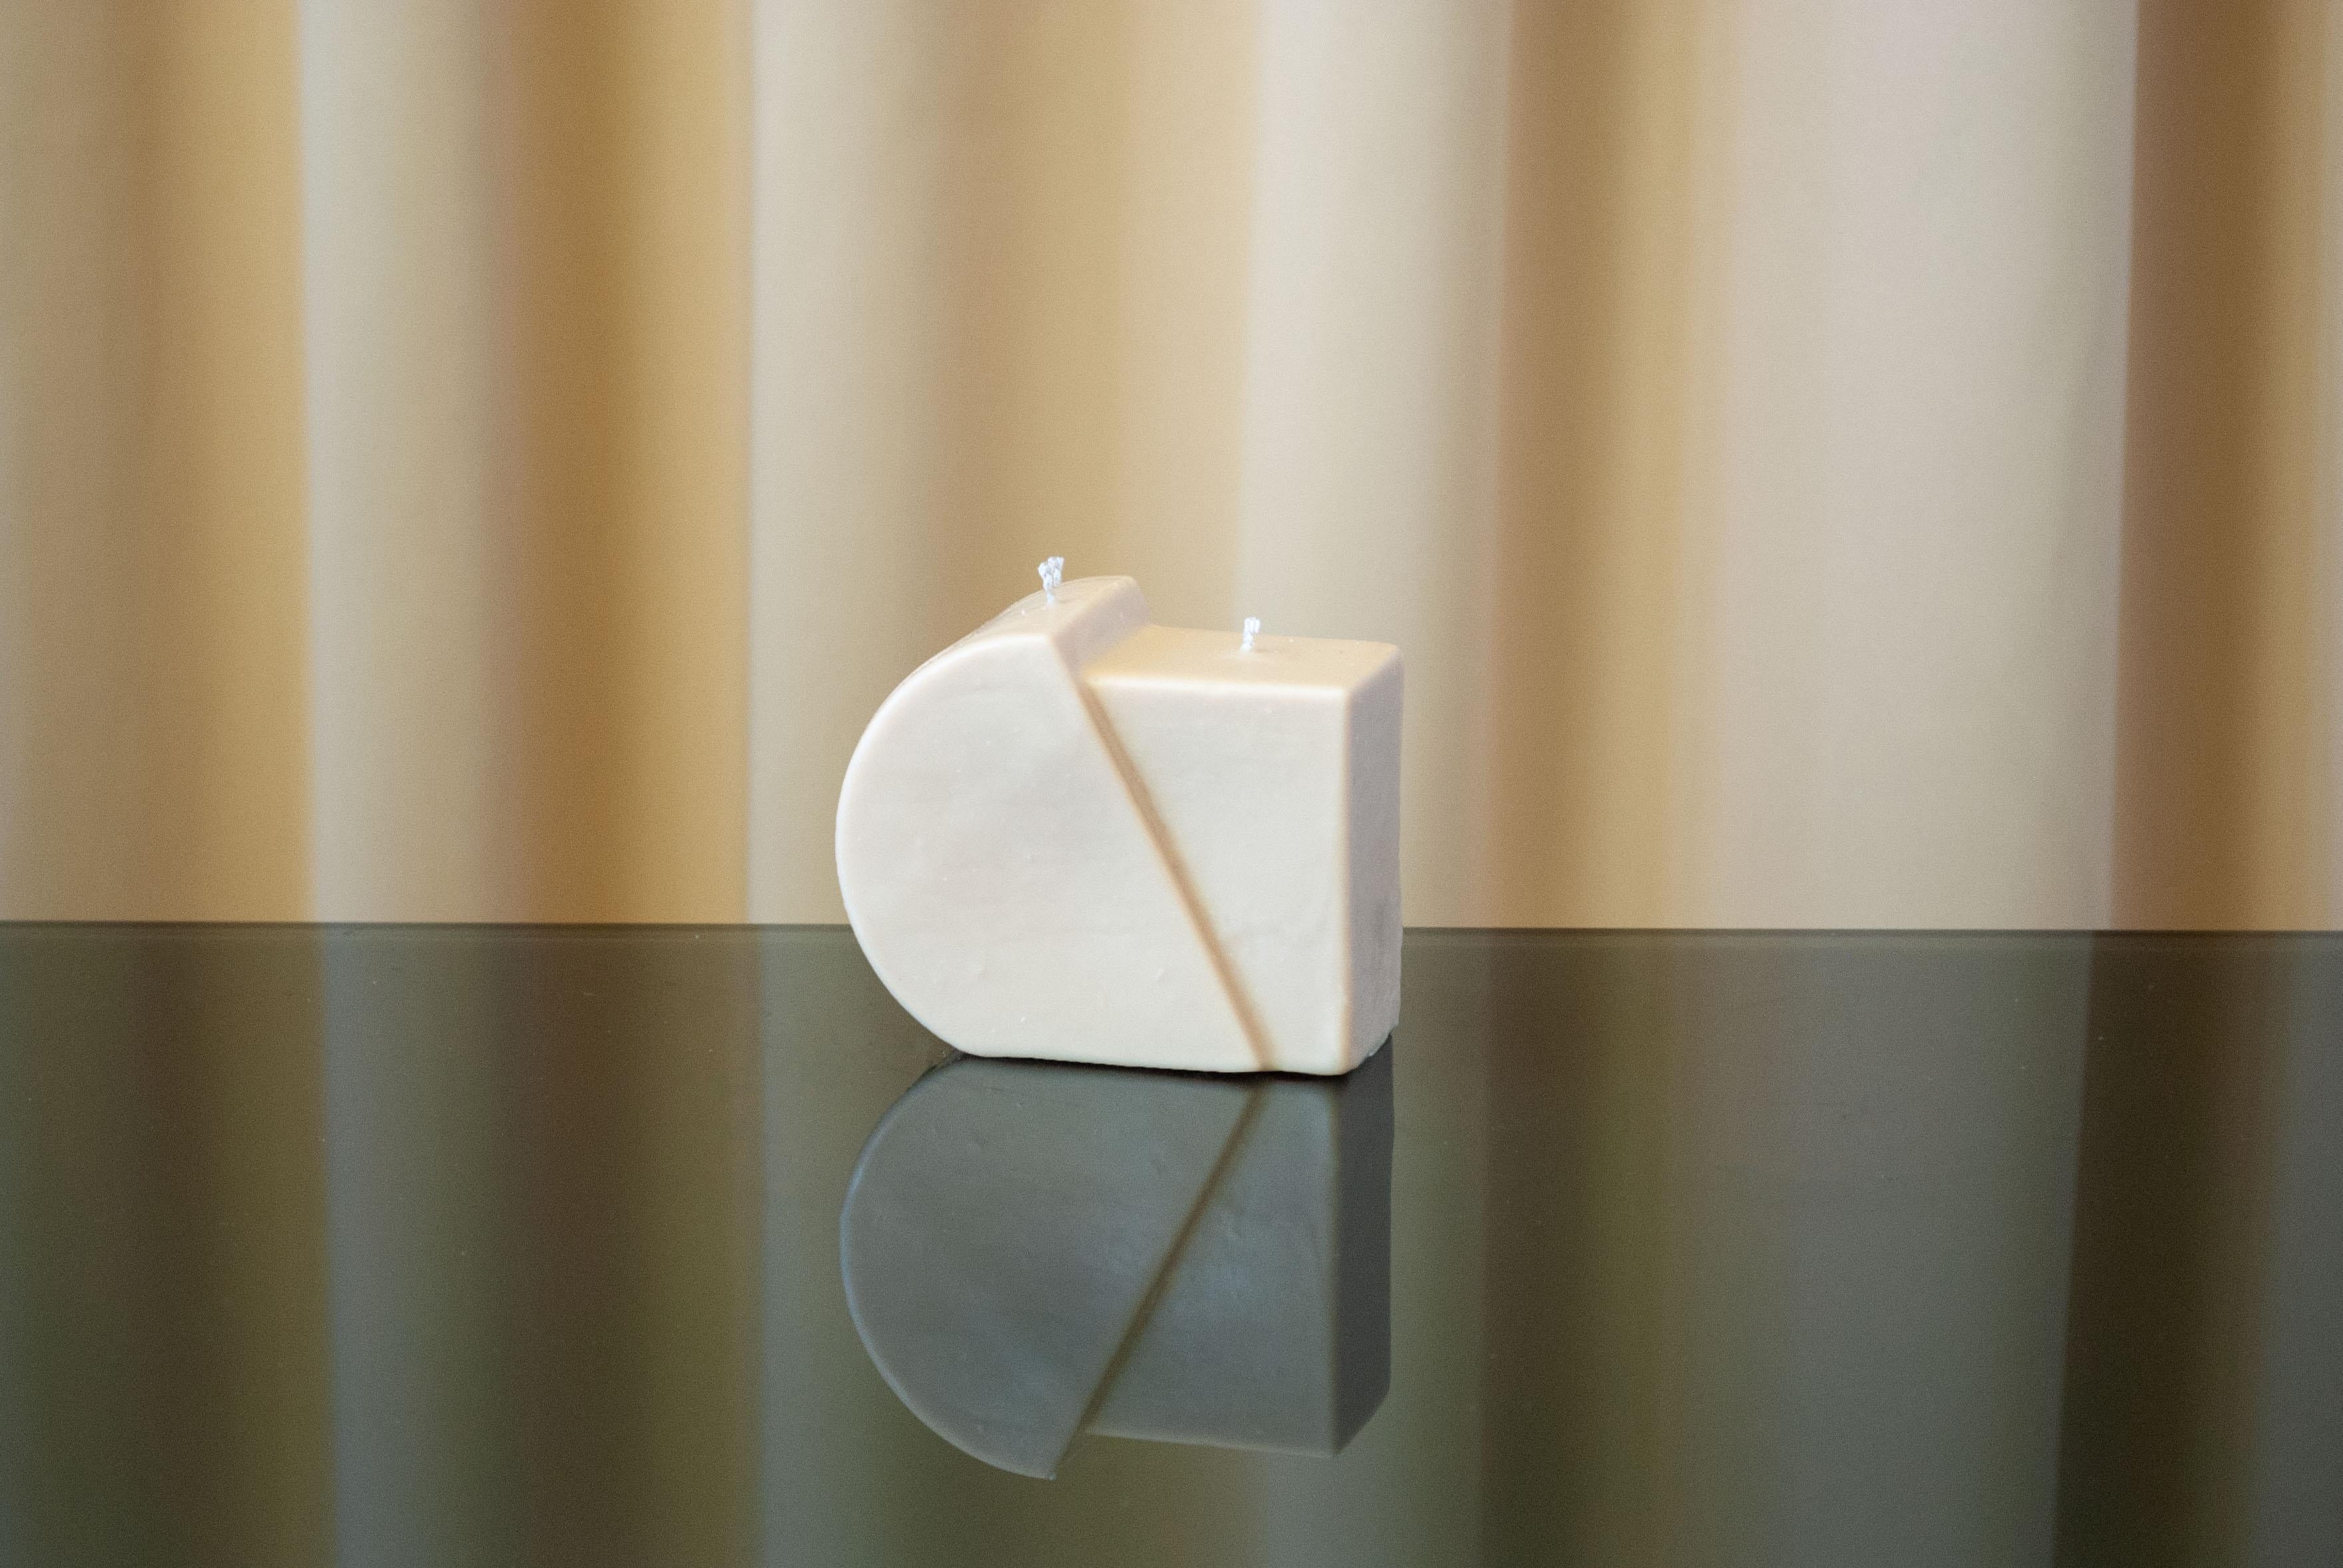 Batch no.1

Limited edition

Intersecting candles are a family of three two-wick candles, each consisting of two intersected shapes. The shapes are informed by my previous mould studies and celebrate a merger of geometric shapes.

Batch no.1